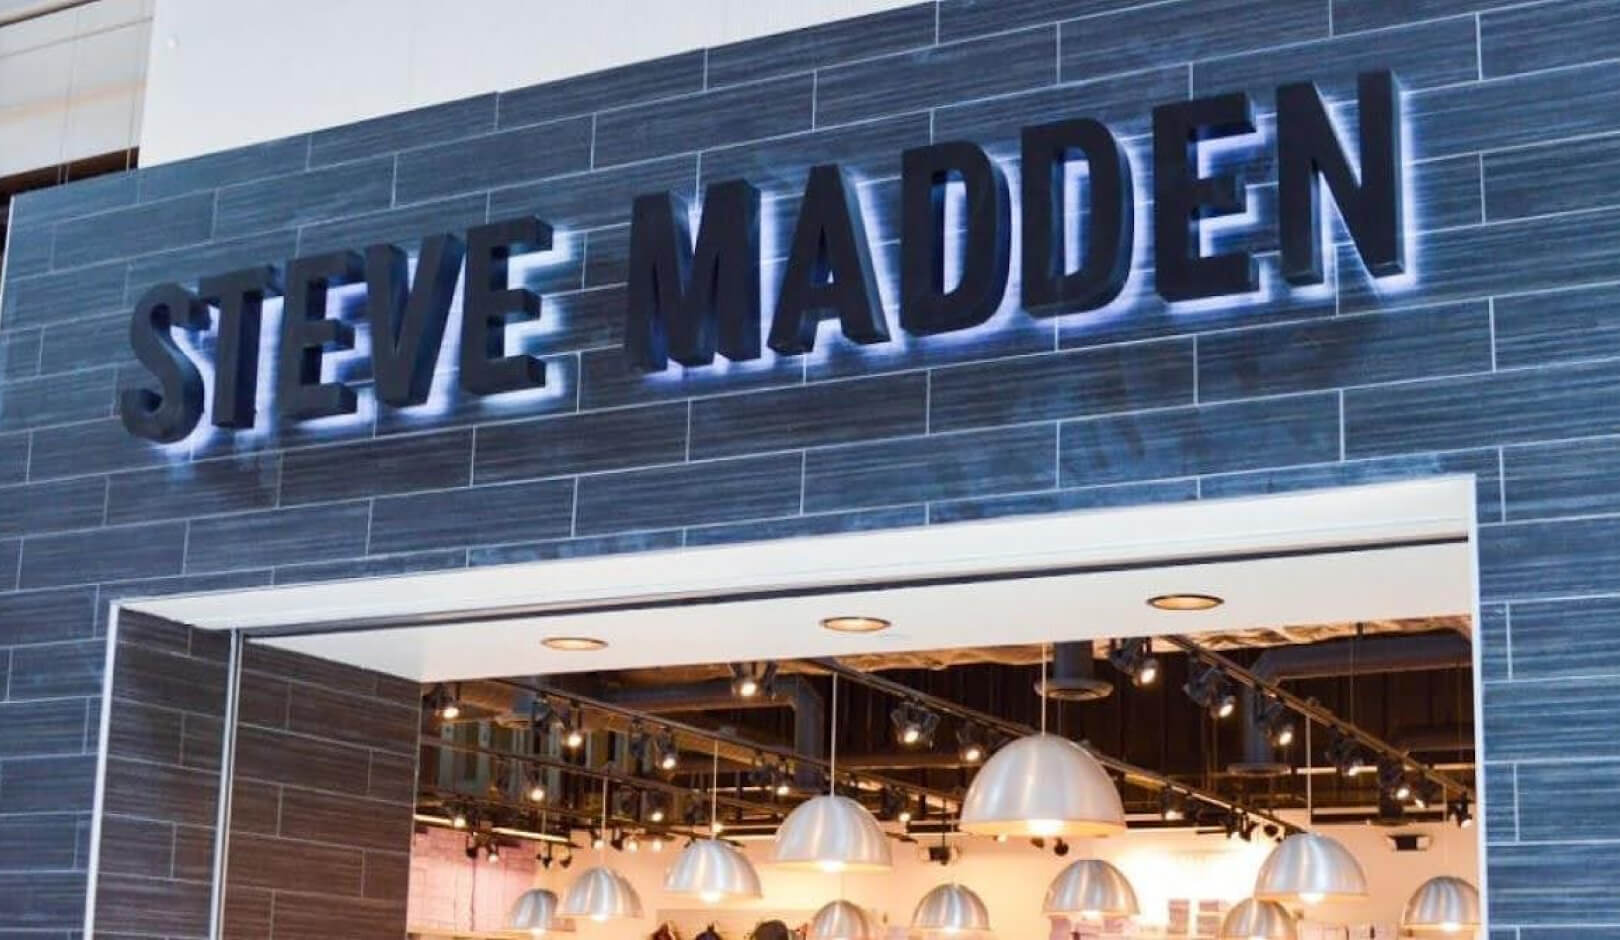 Steve Madden store signage, exemplifying strong brand presence for multi-channel retail strategy discussion